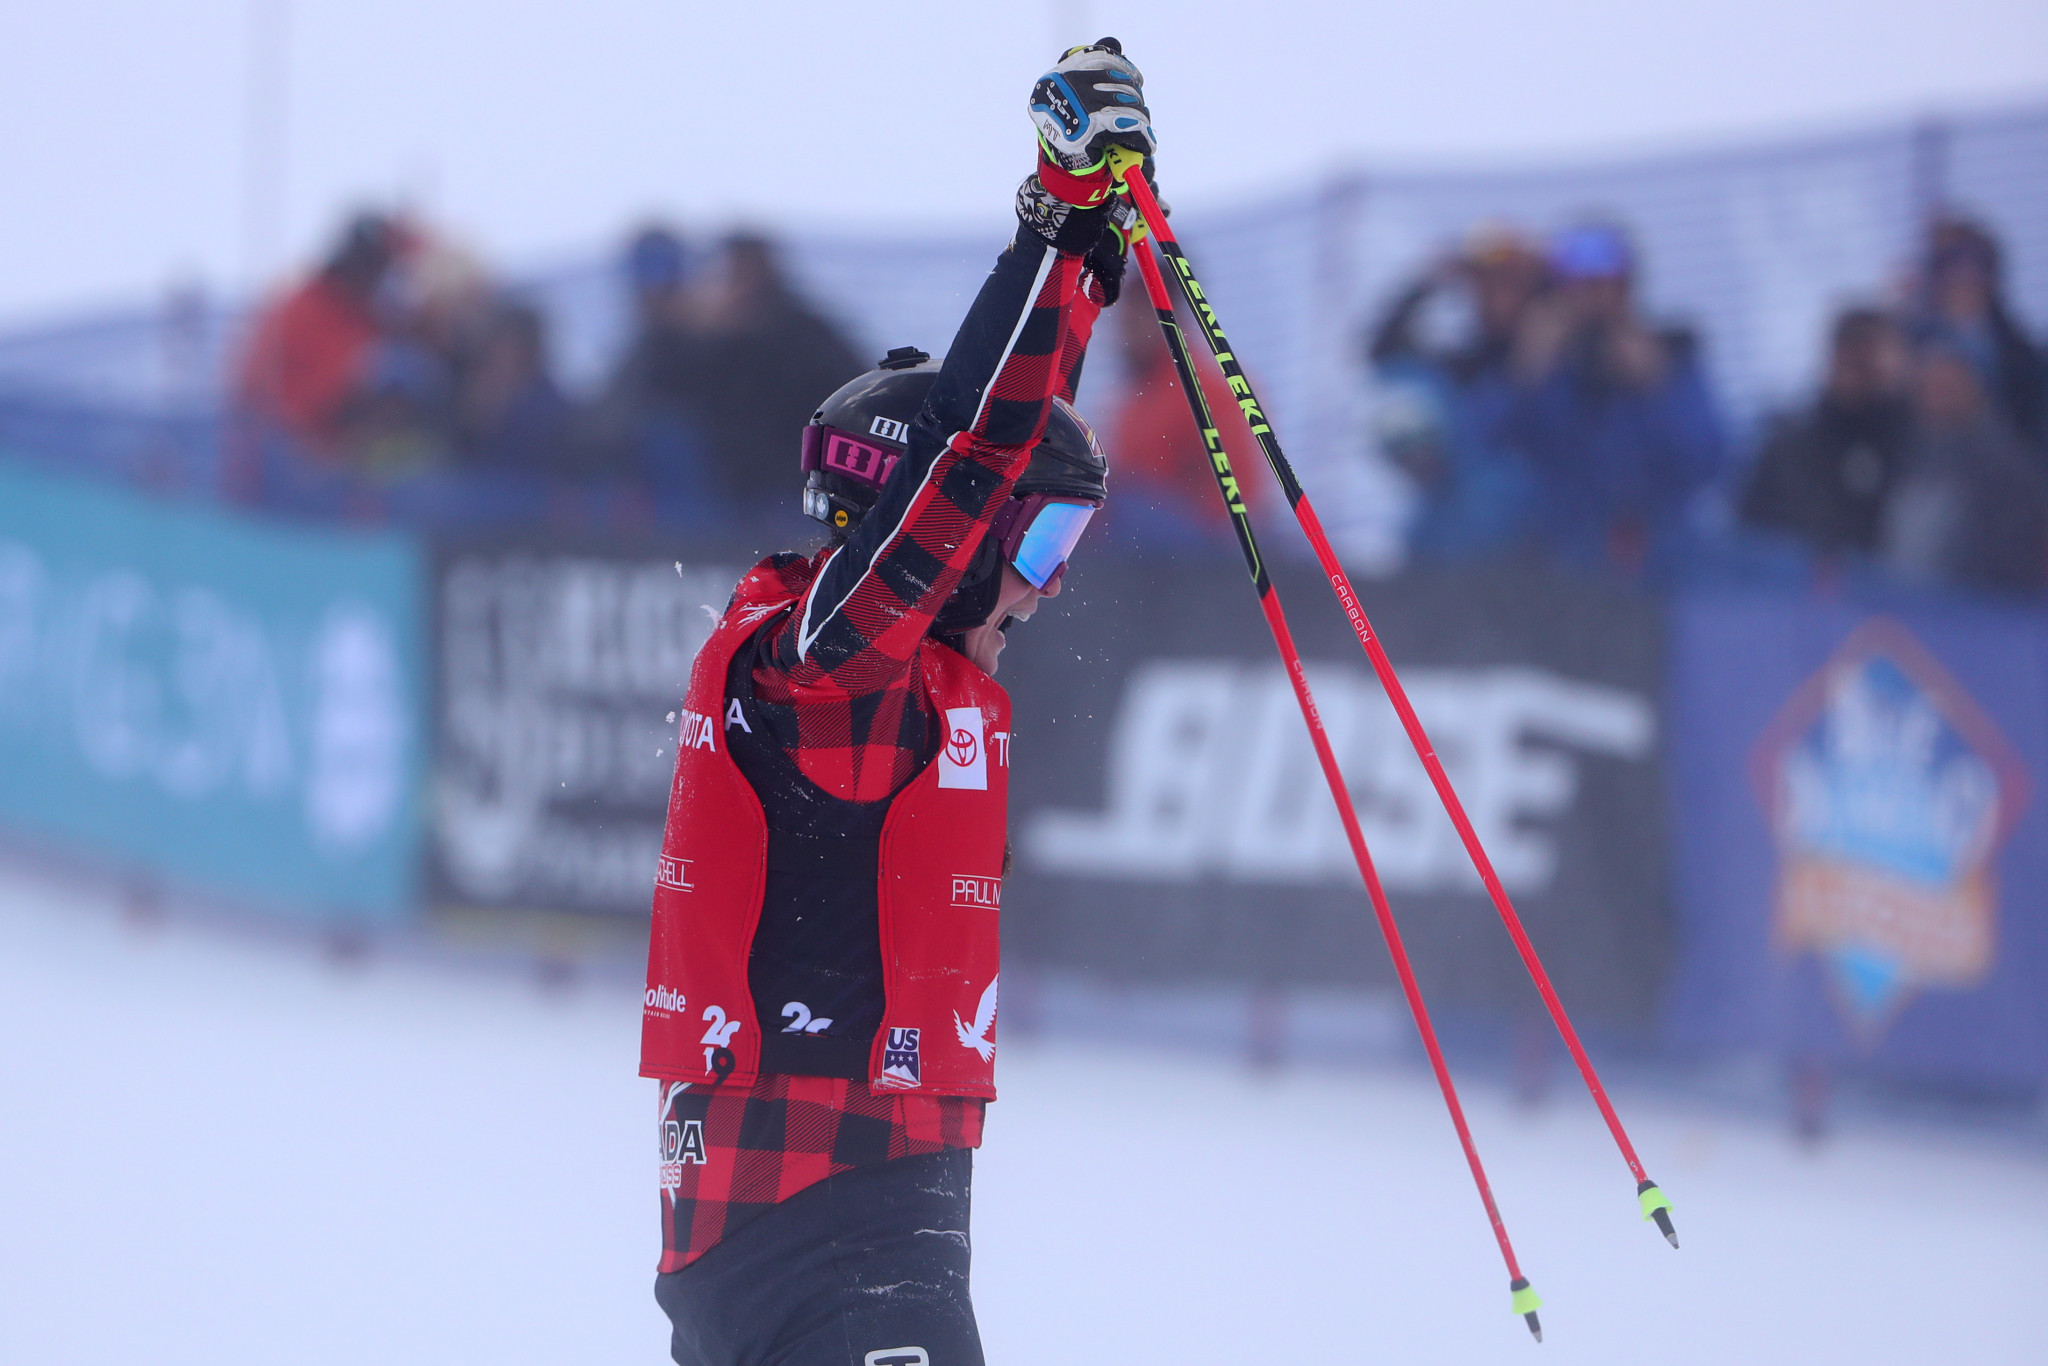 Canadians dominate second day of qualifying at FIS Ski Cross World Cup in Feldberg